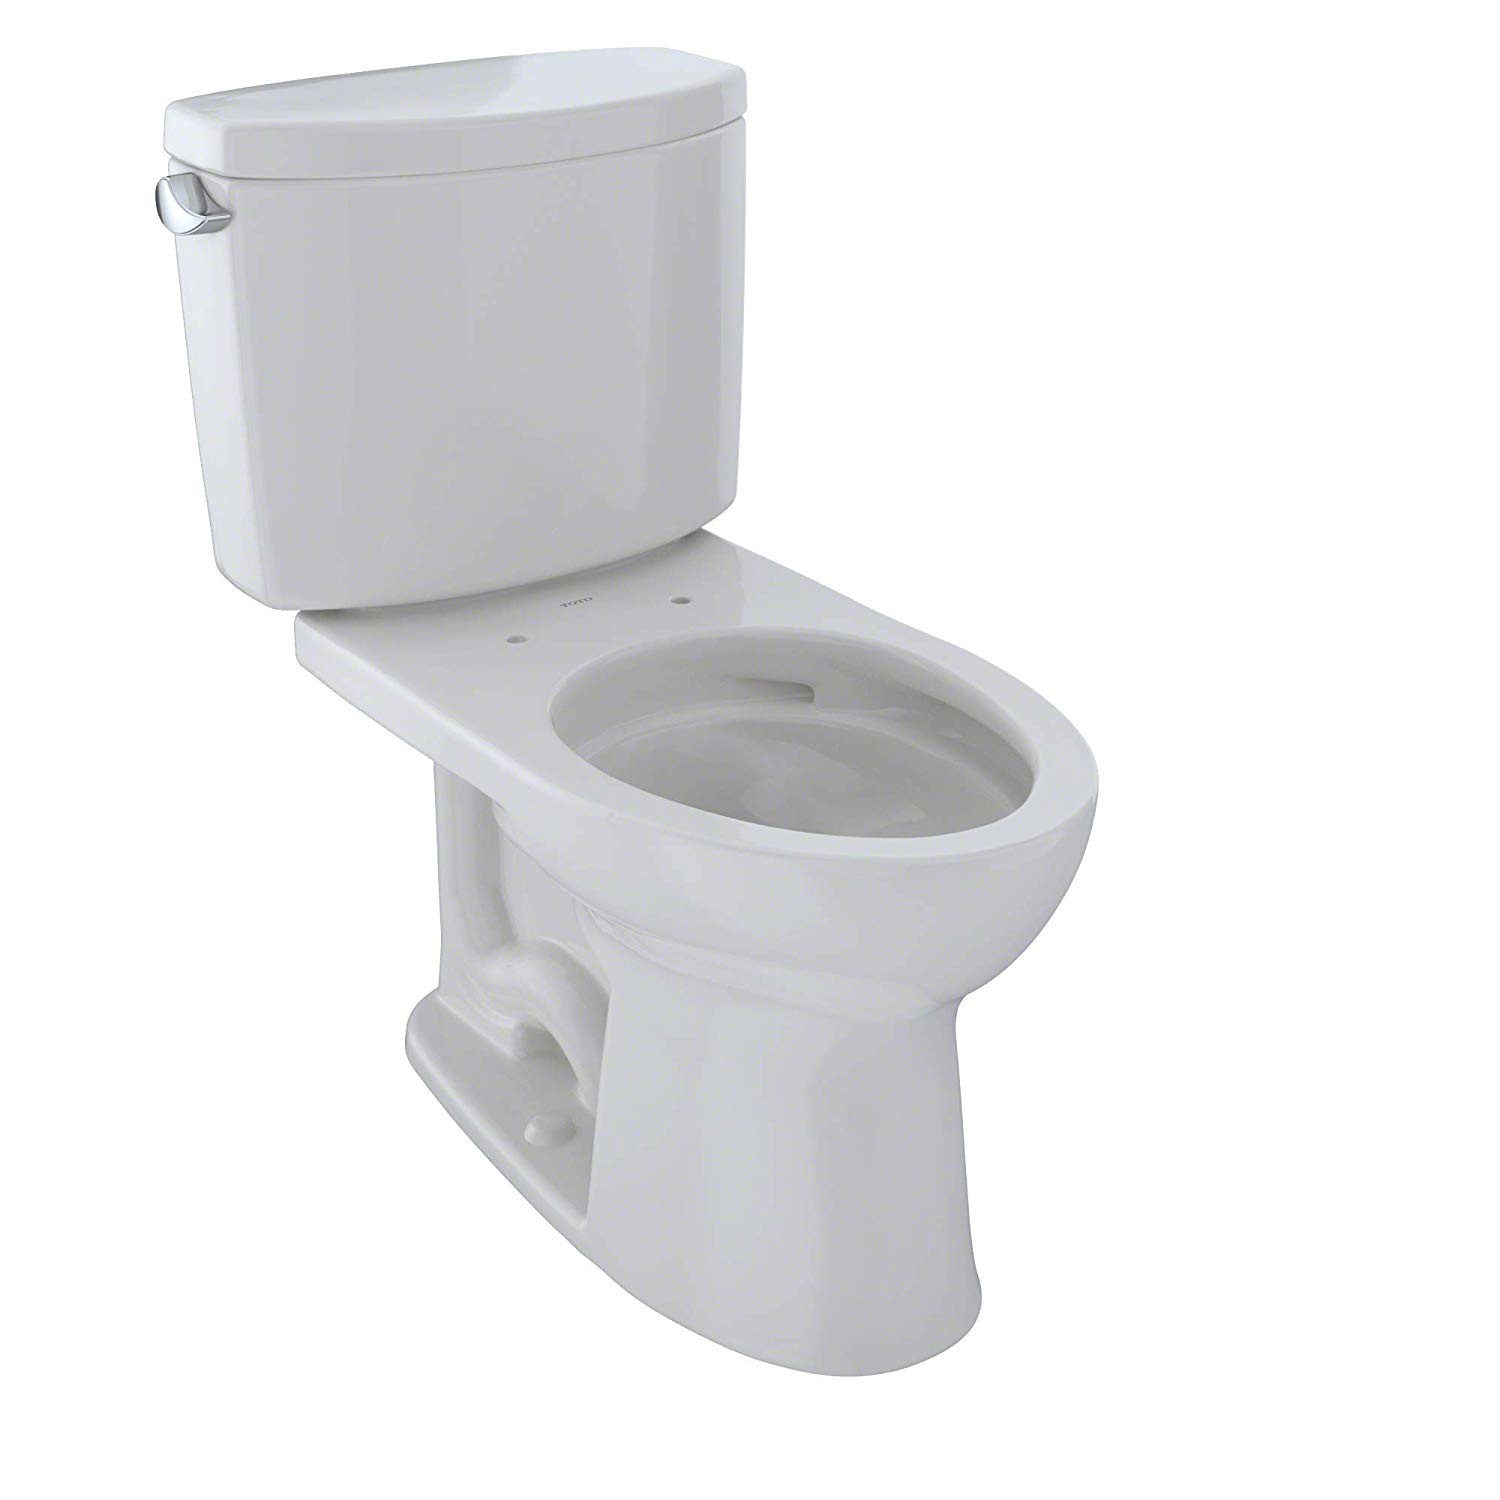 TOTO CST454CEFG#11 DRAKE II TWO-PIECE TOILET, 1.28 GPF, ELONGATED BOWL WITH SANAGLOSS